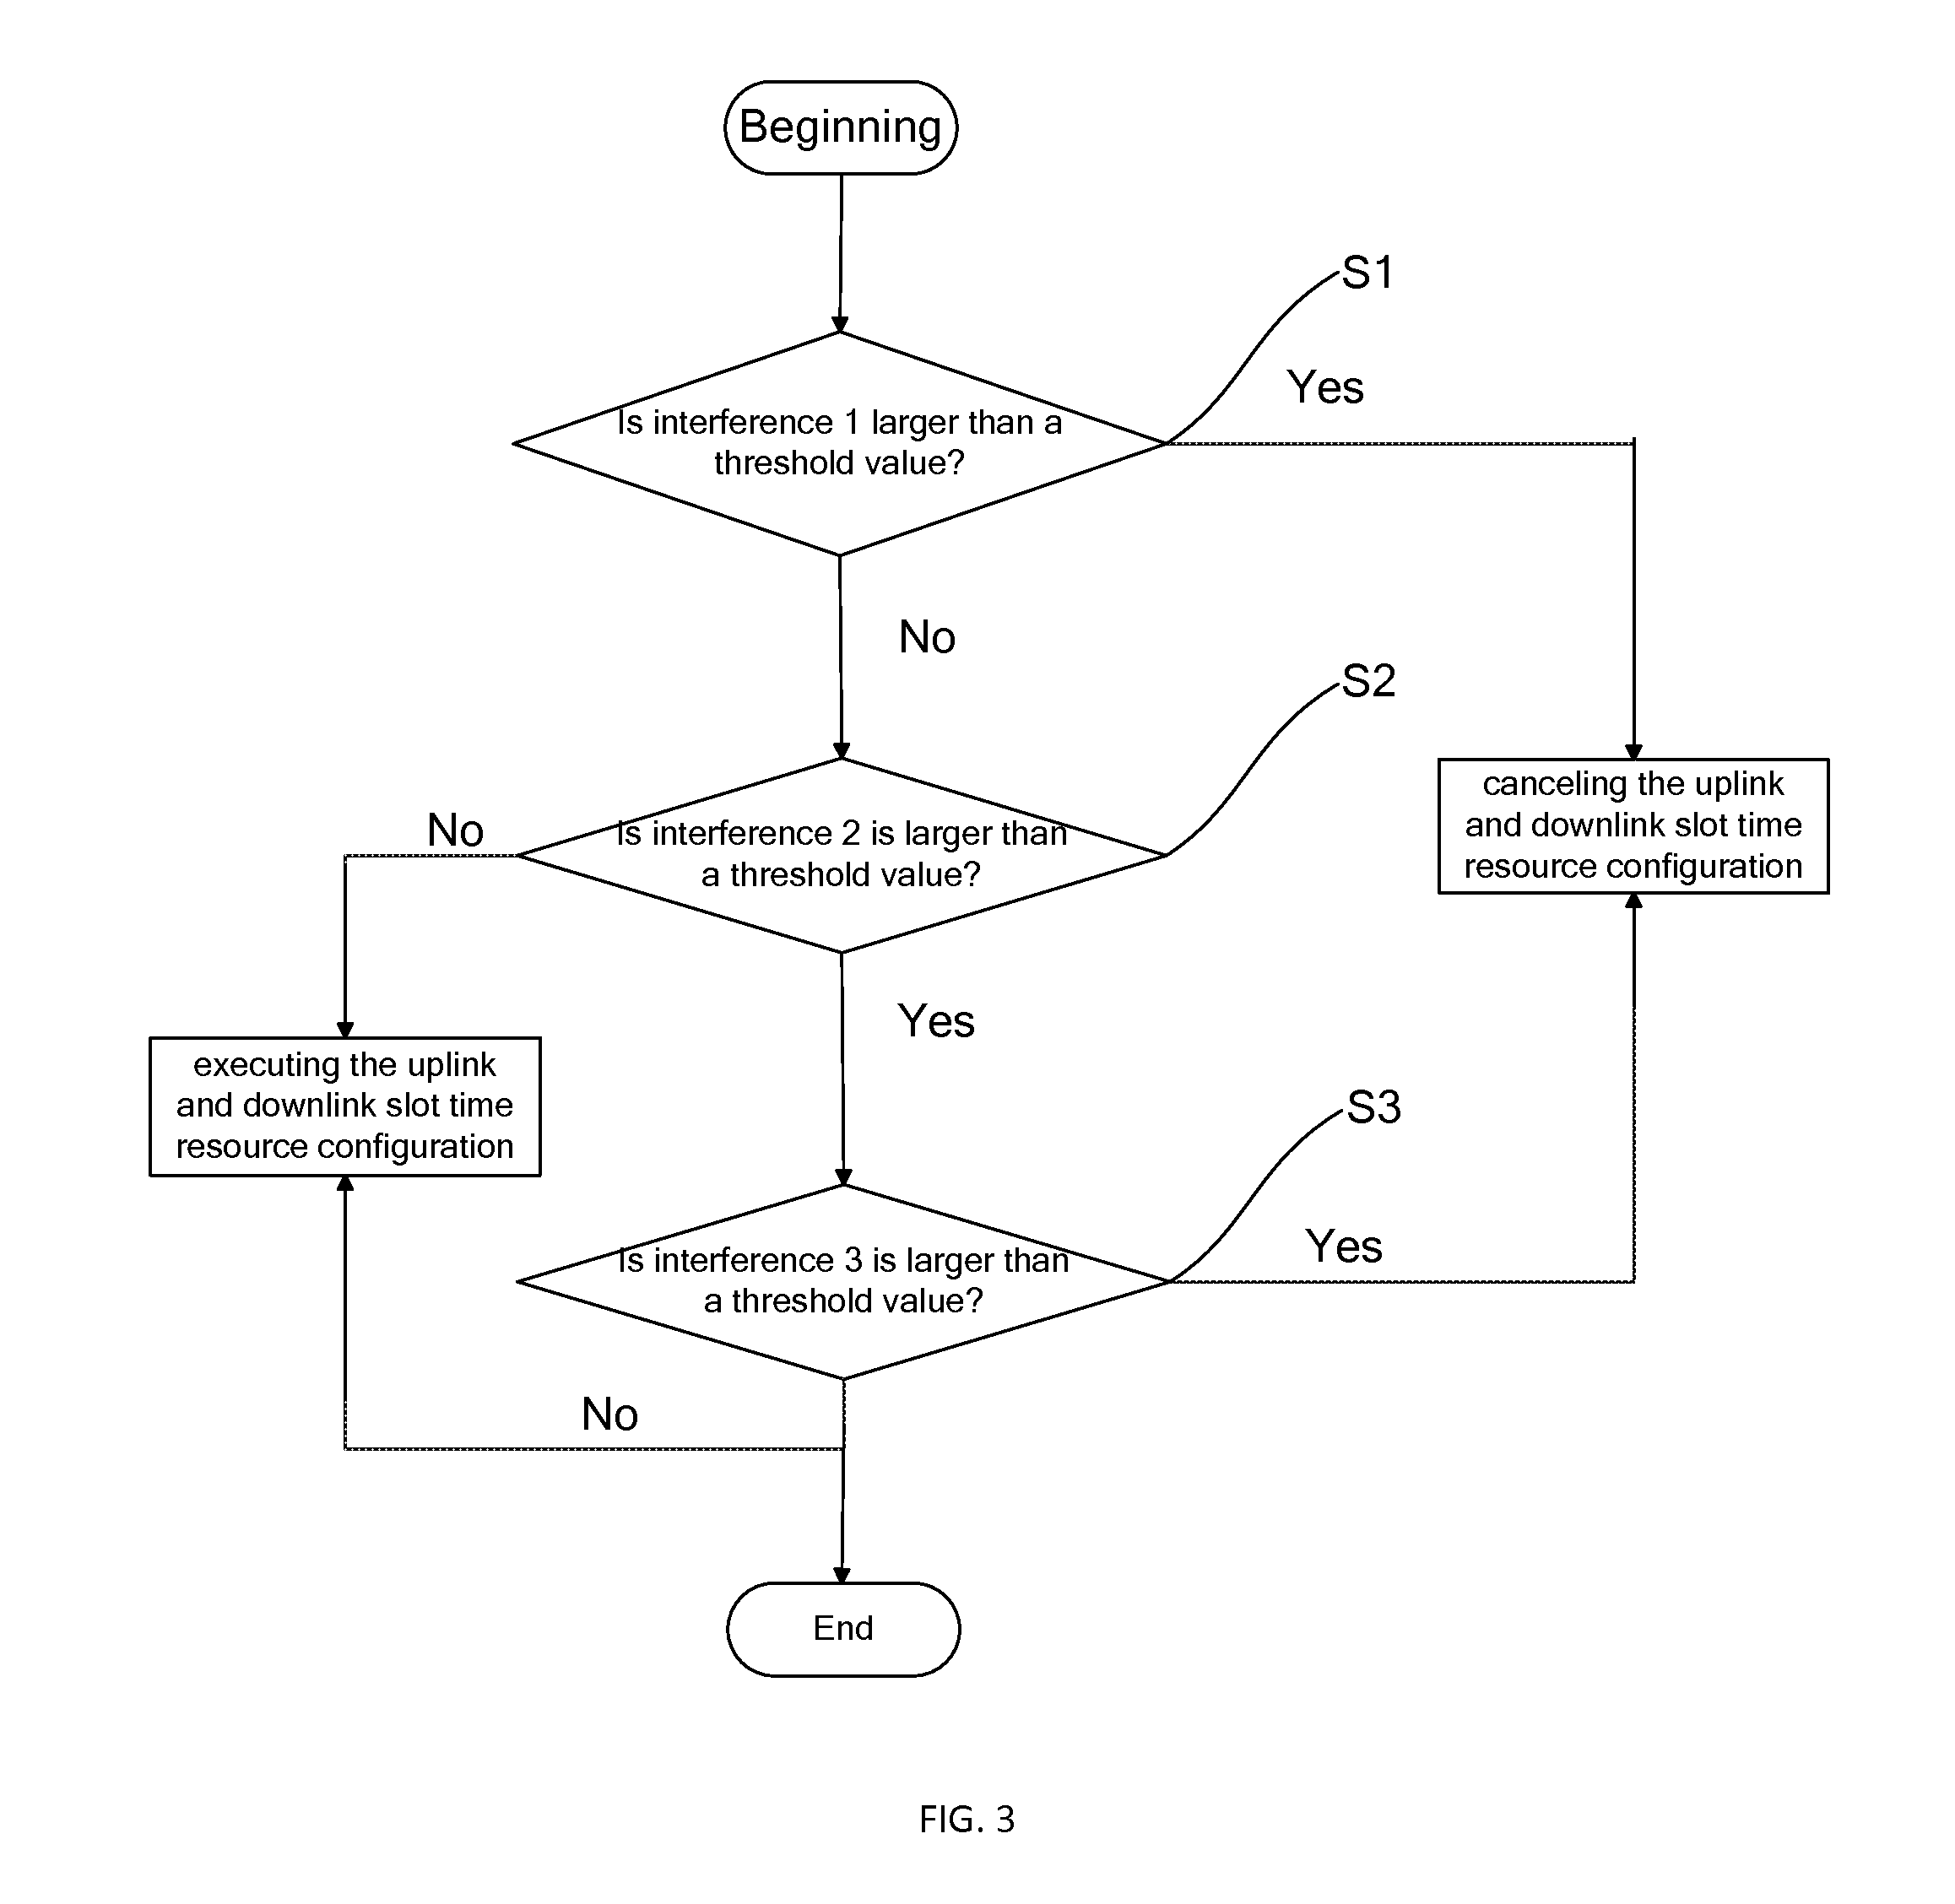 Uplink and downlink slot time resource configuration method based on interference perception in time division duplex system